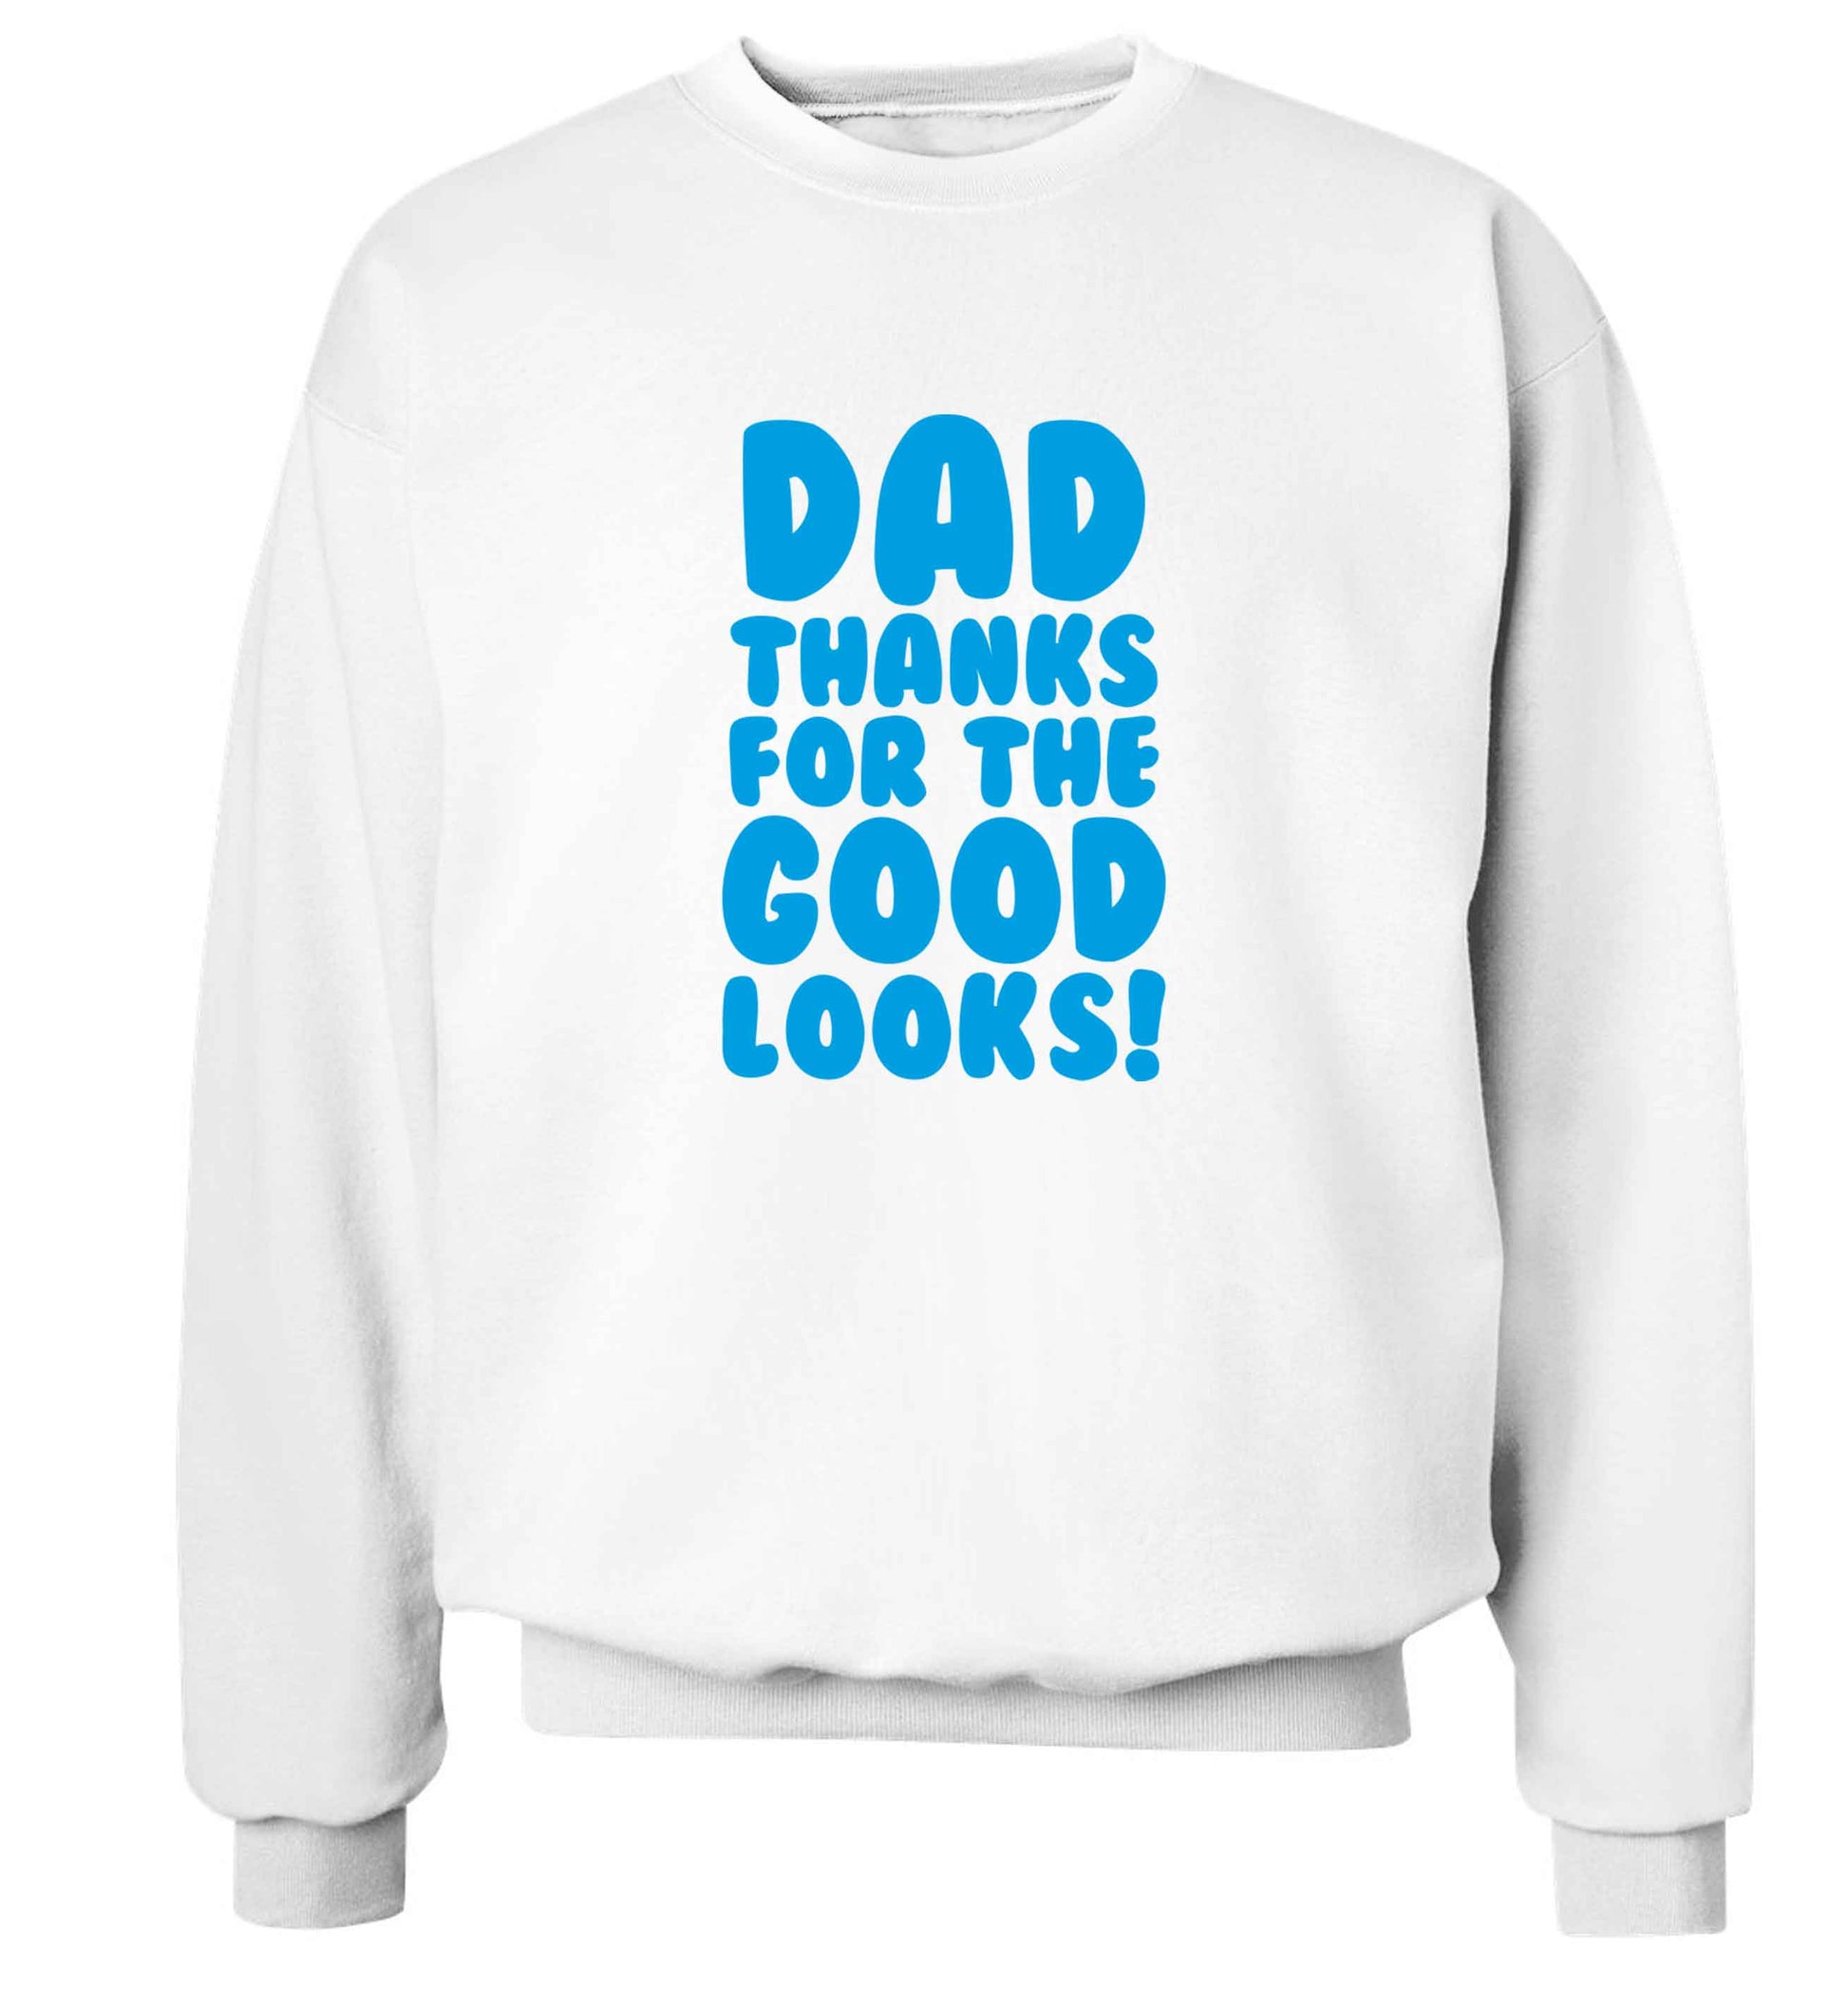 Dad thanks for the good looks adult's unisex white sweater 2XL